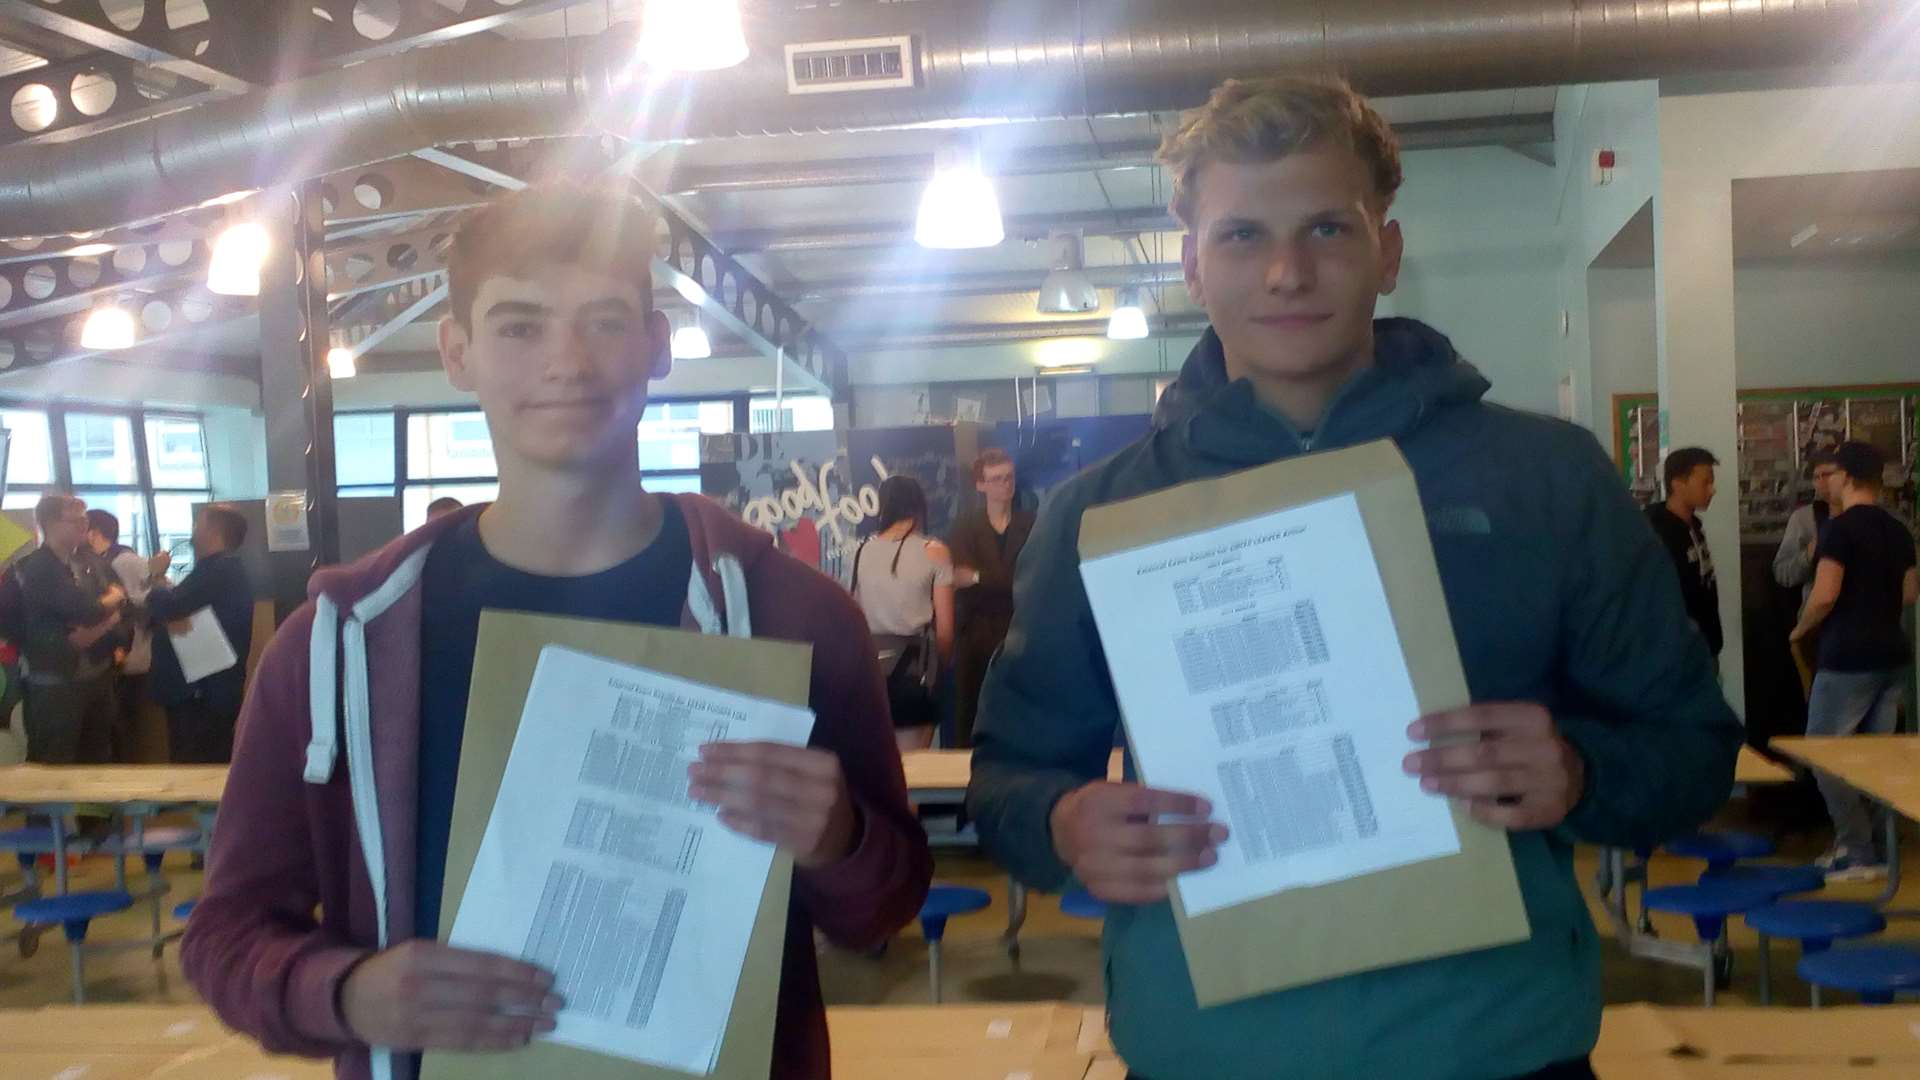 L-R Luke Thorpe scored 4 As and 1 C, Arthur Leaver bagged an A* and 2 As